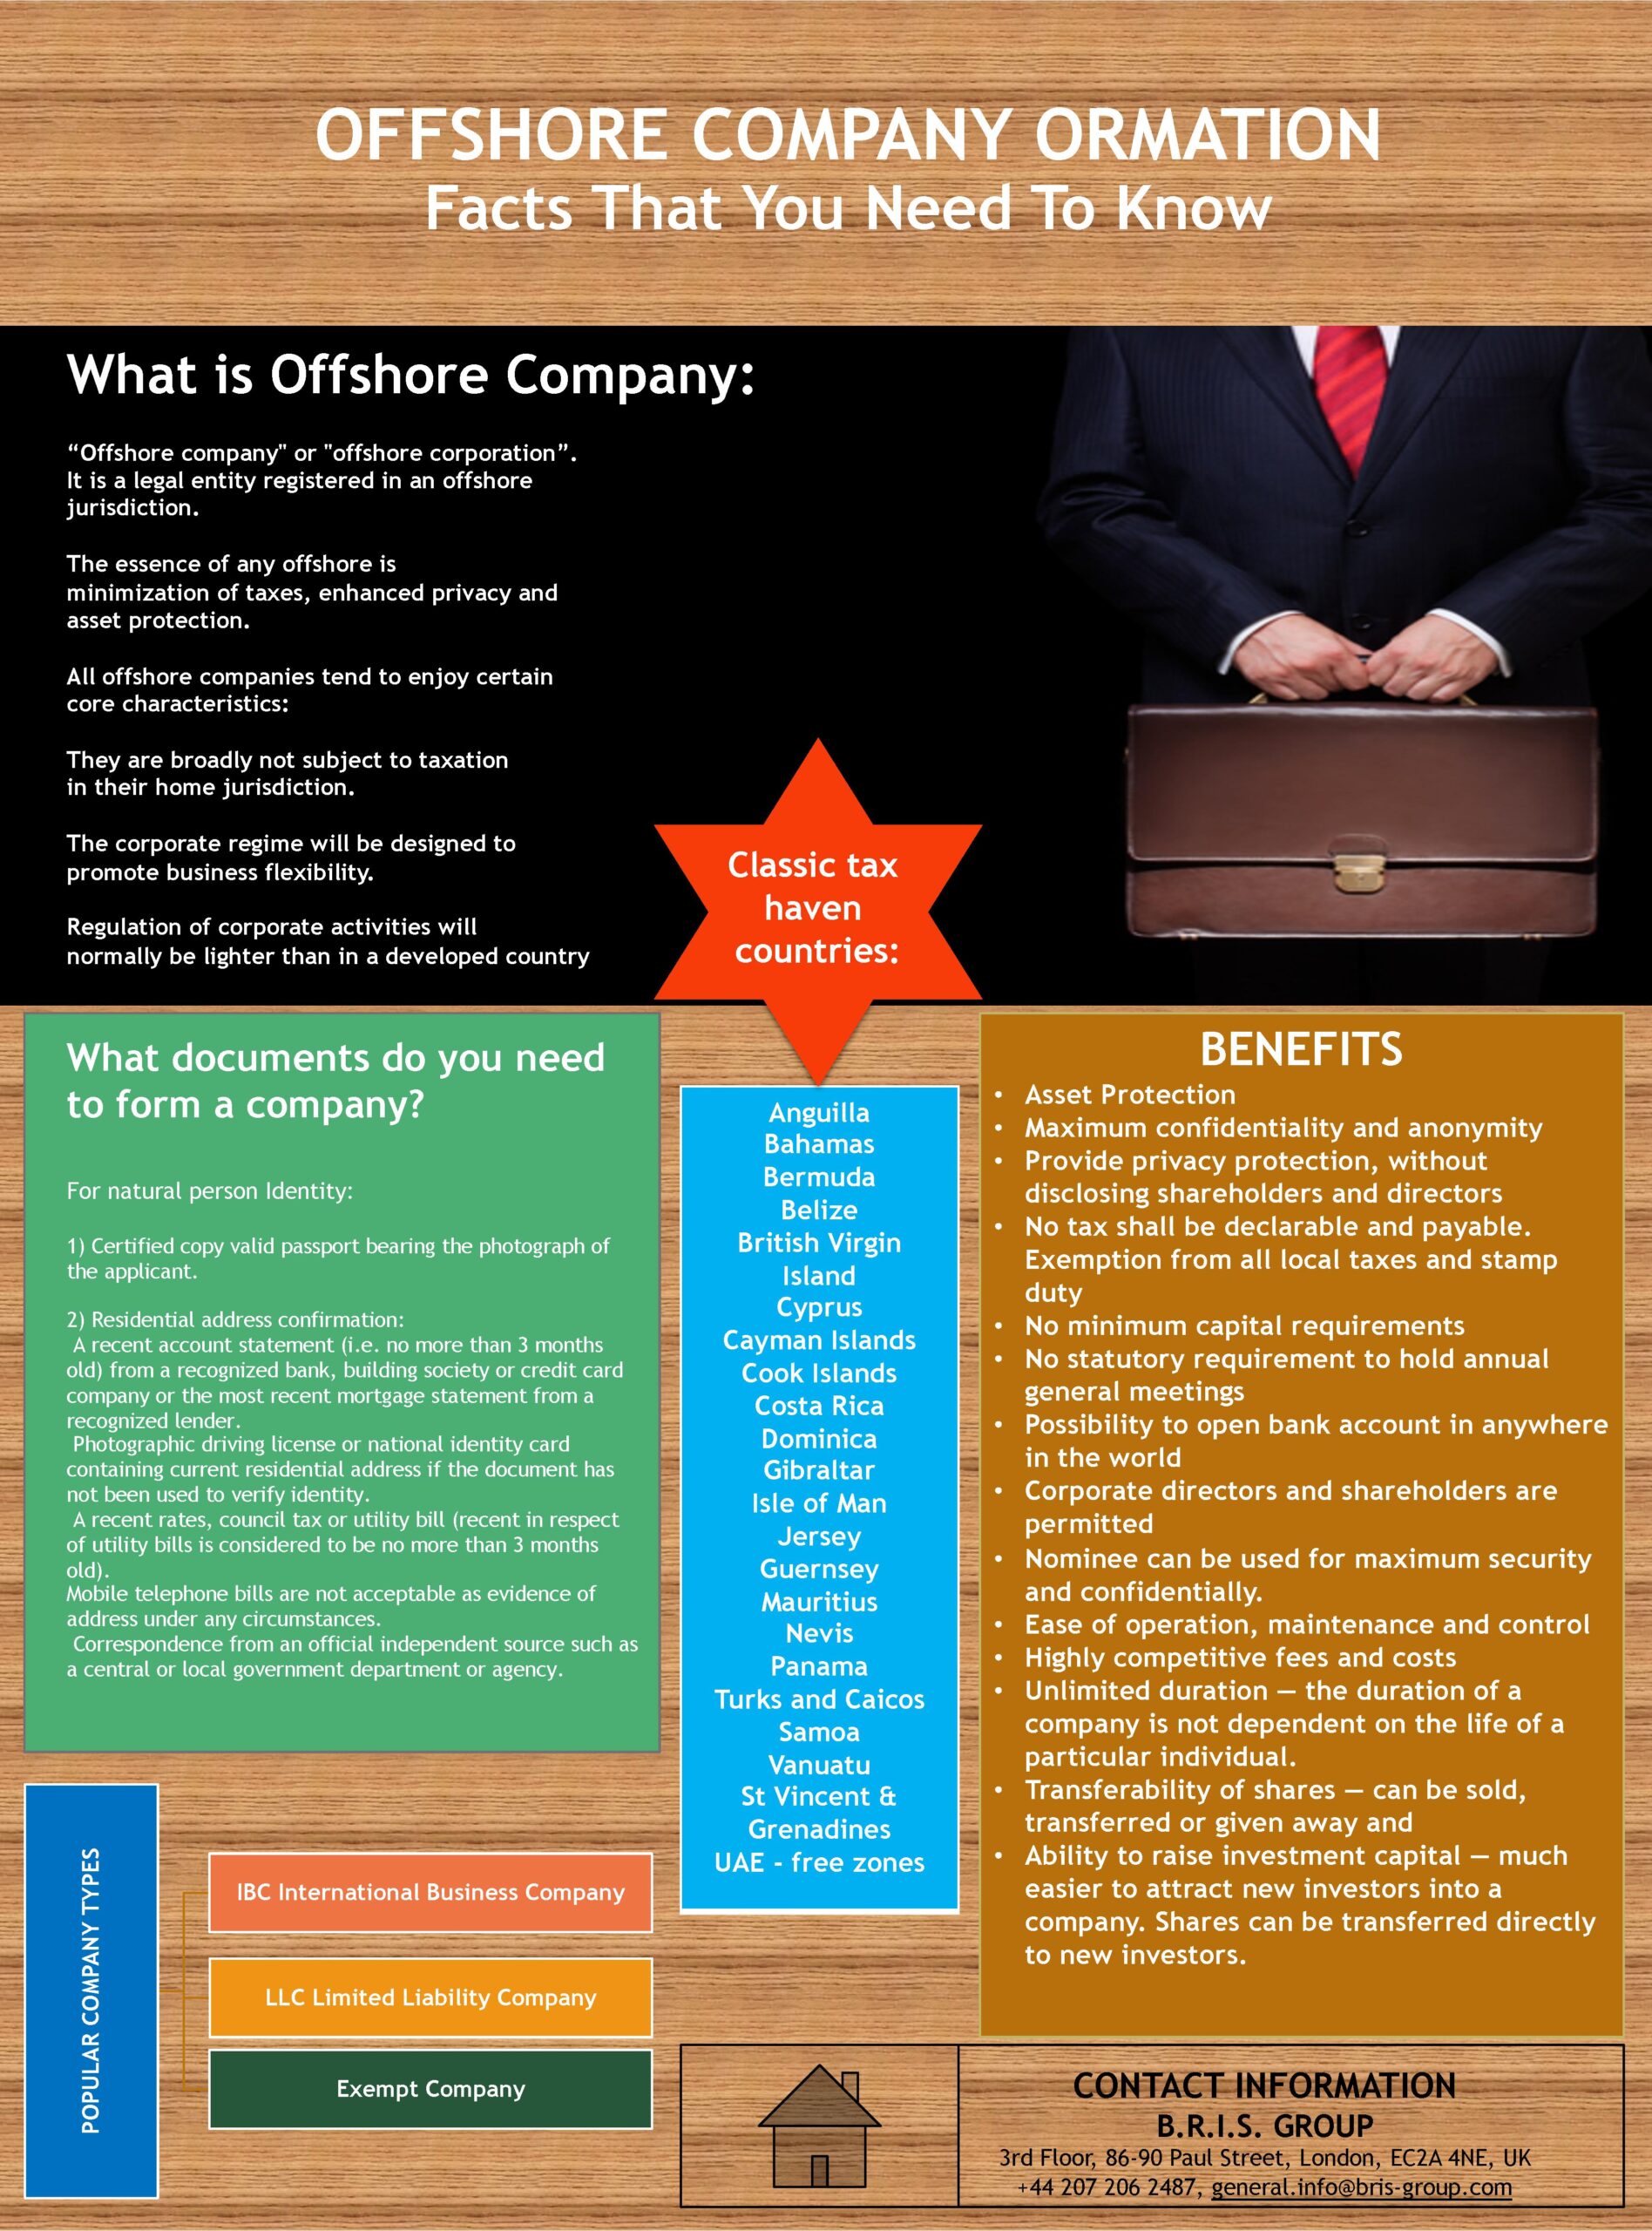 Offshore Company Formation - Facts that you need to know